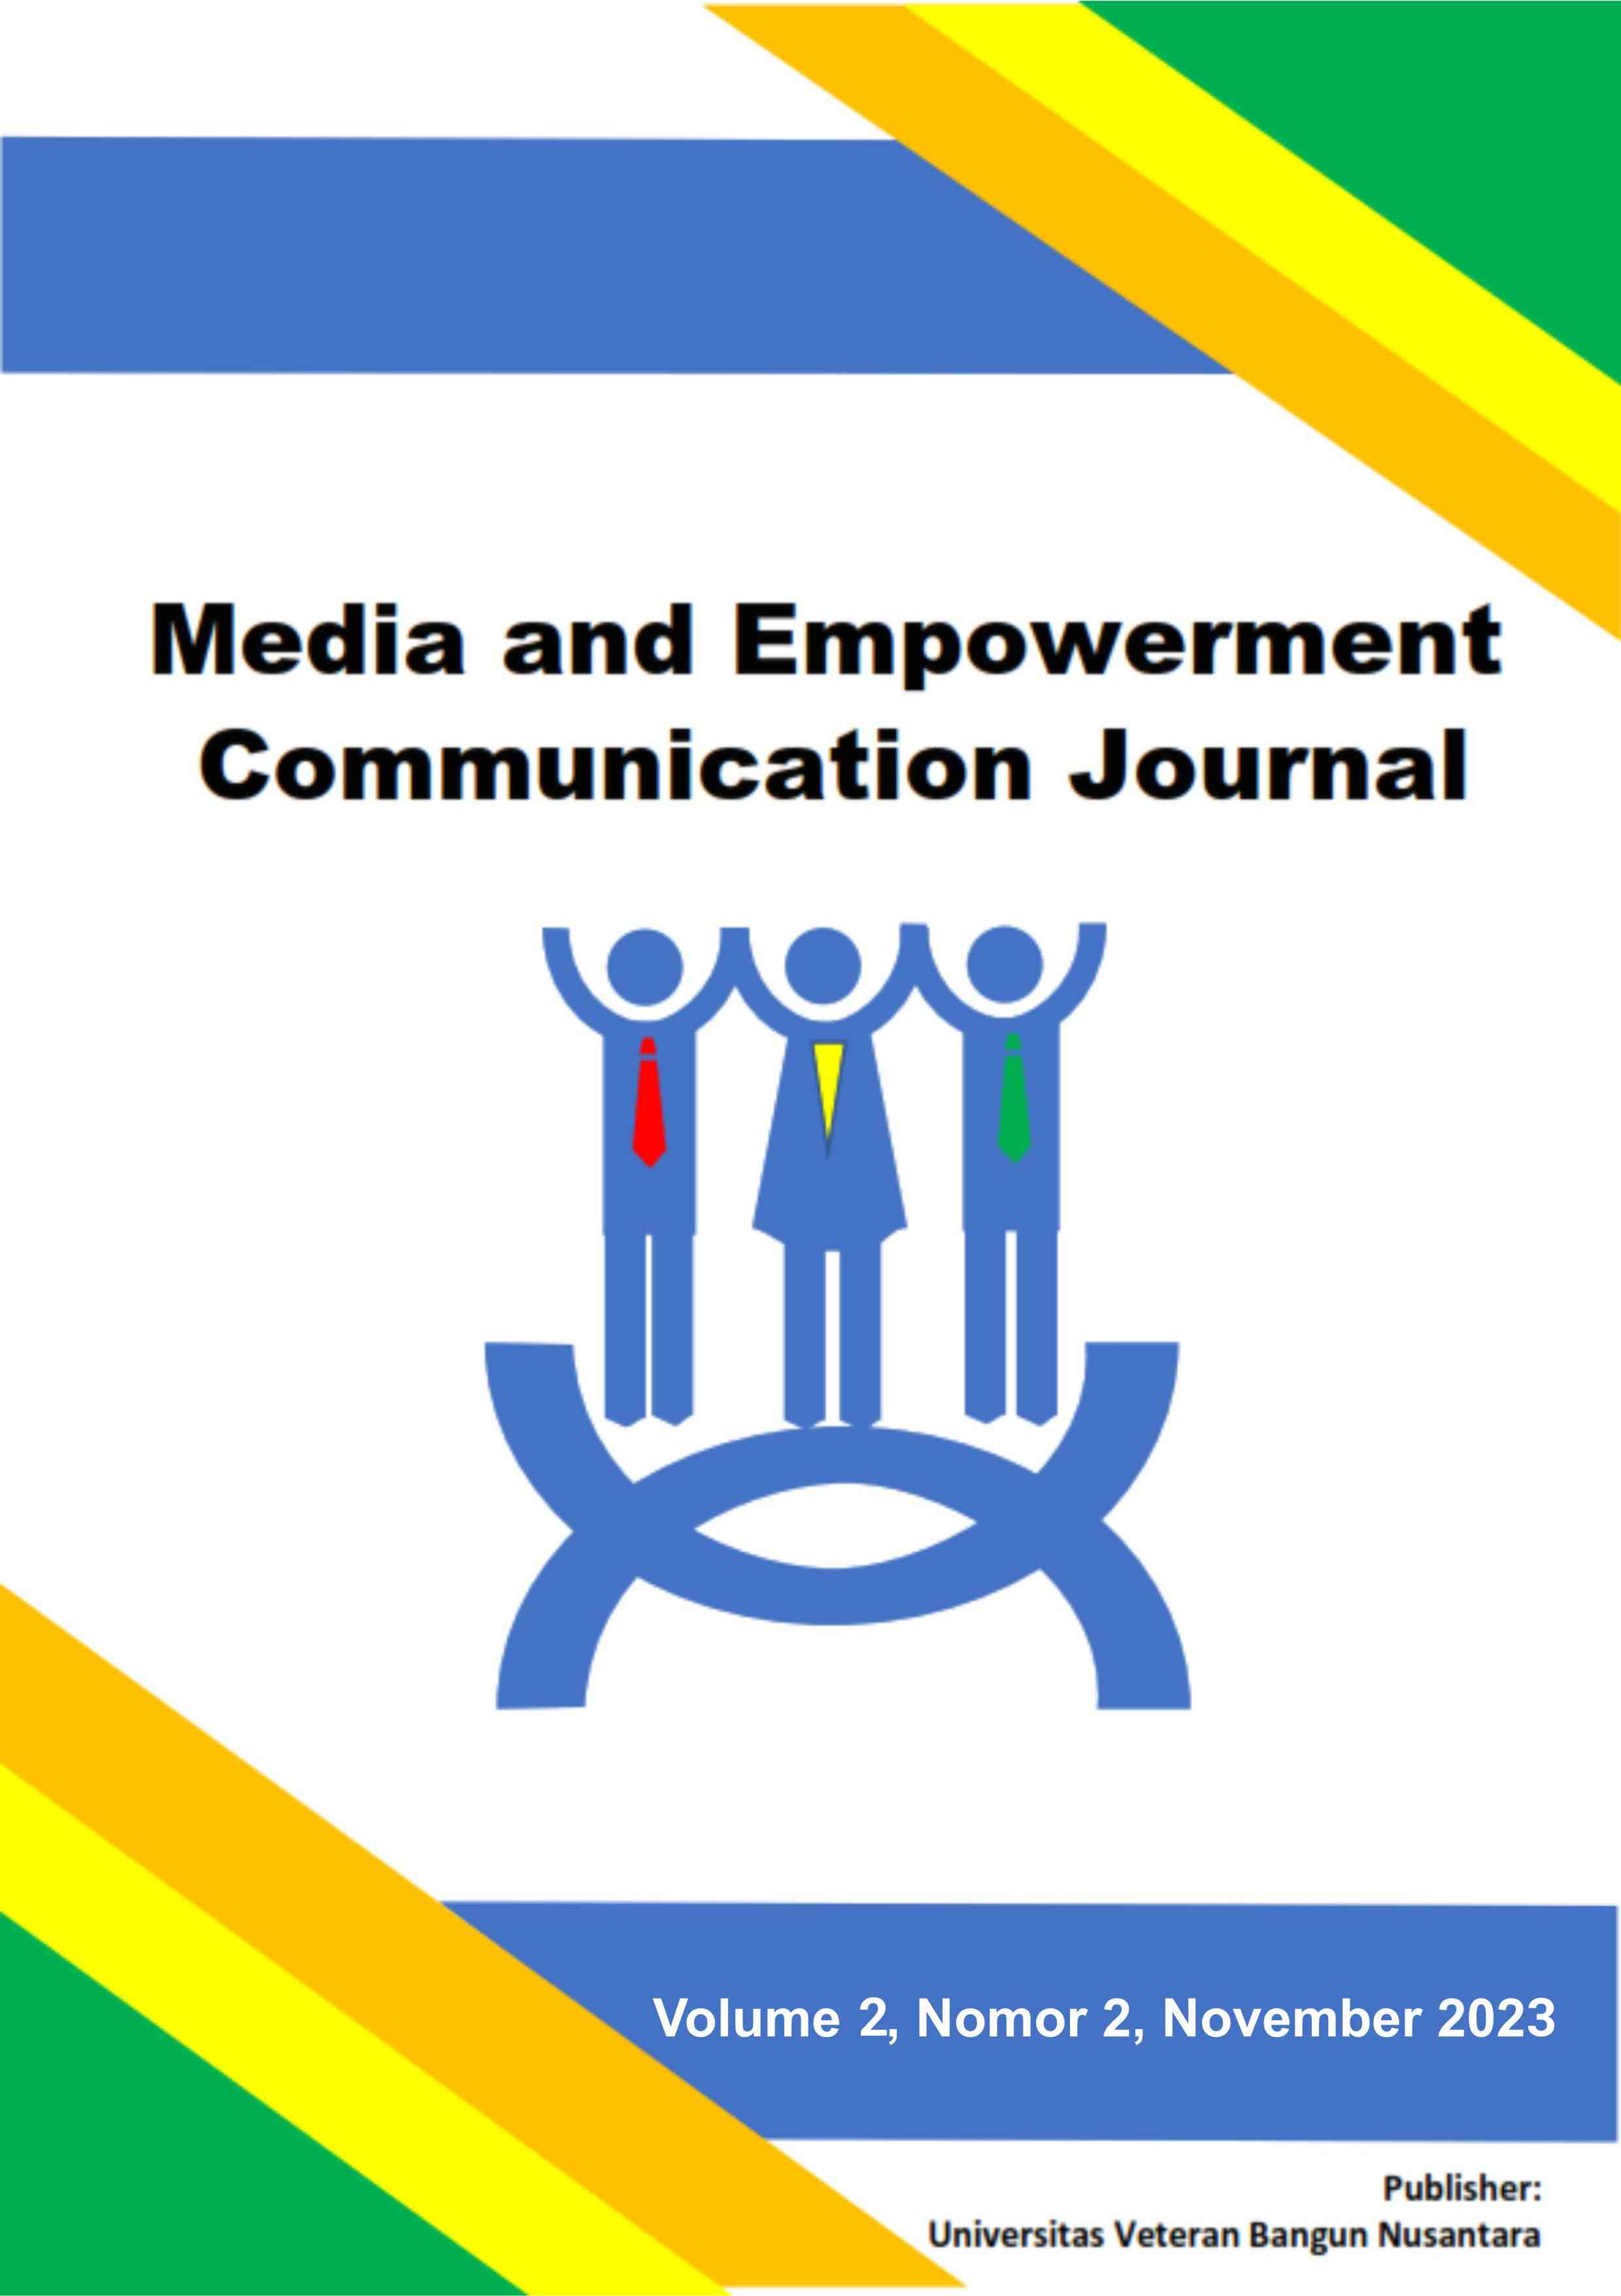 					View Vol. 2 No. 2 (2023): Media and Empowerment Communication Journal
				